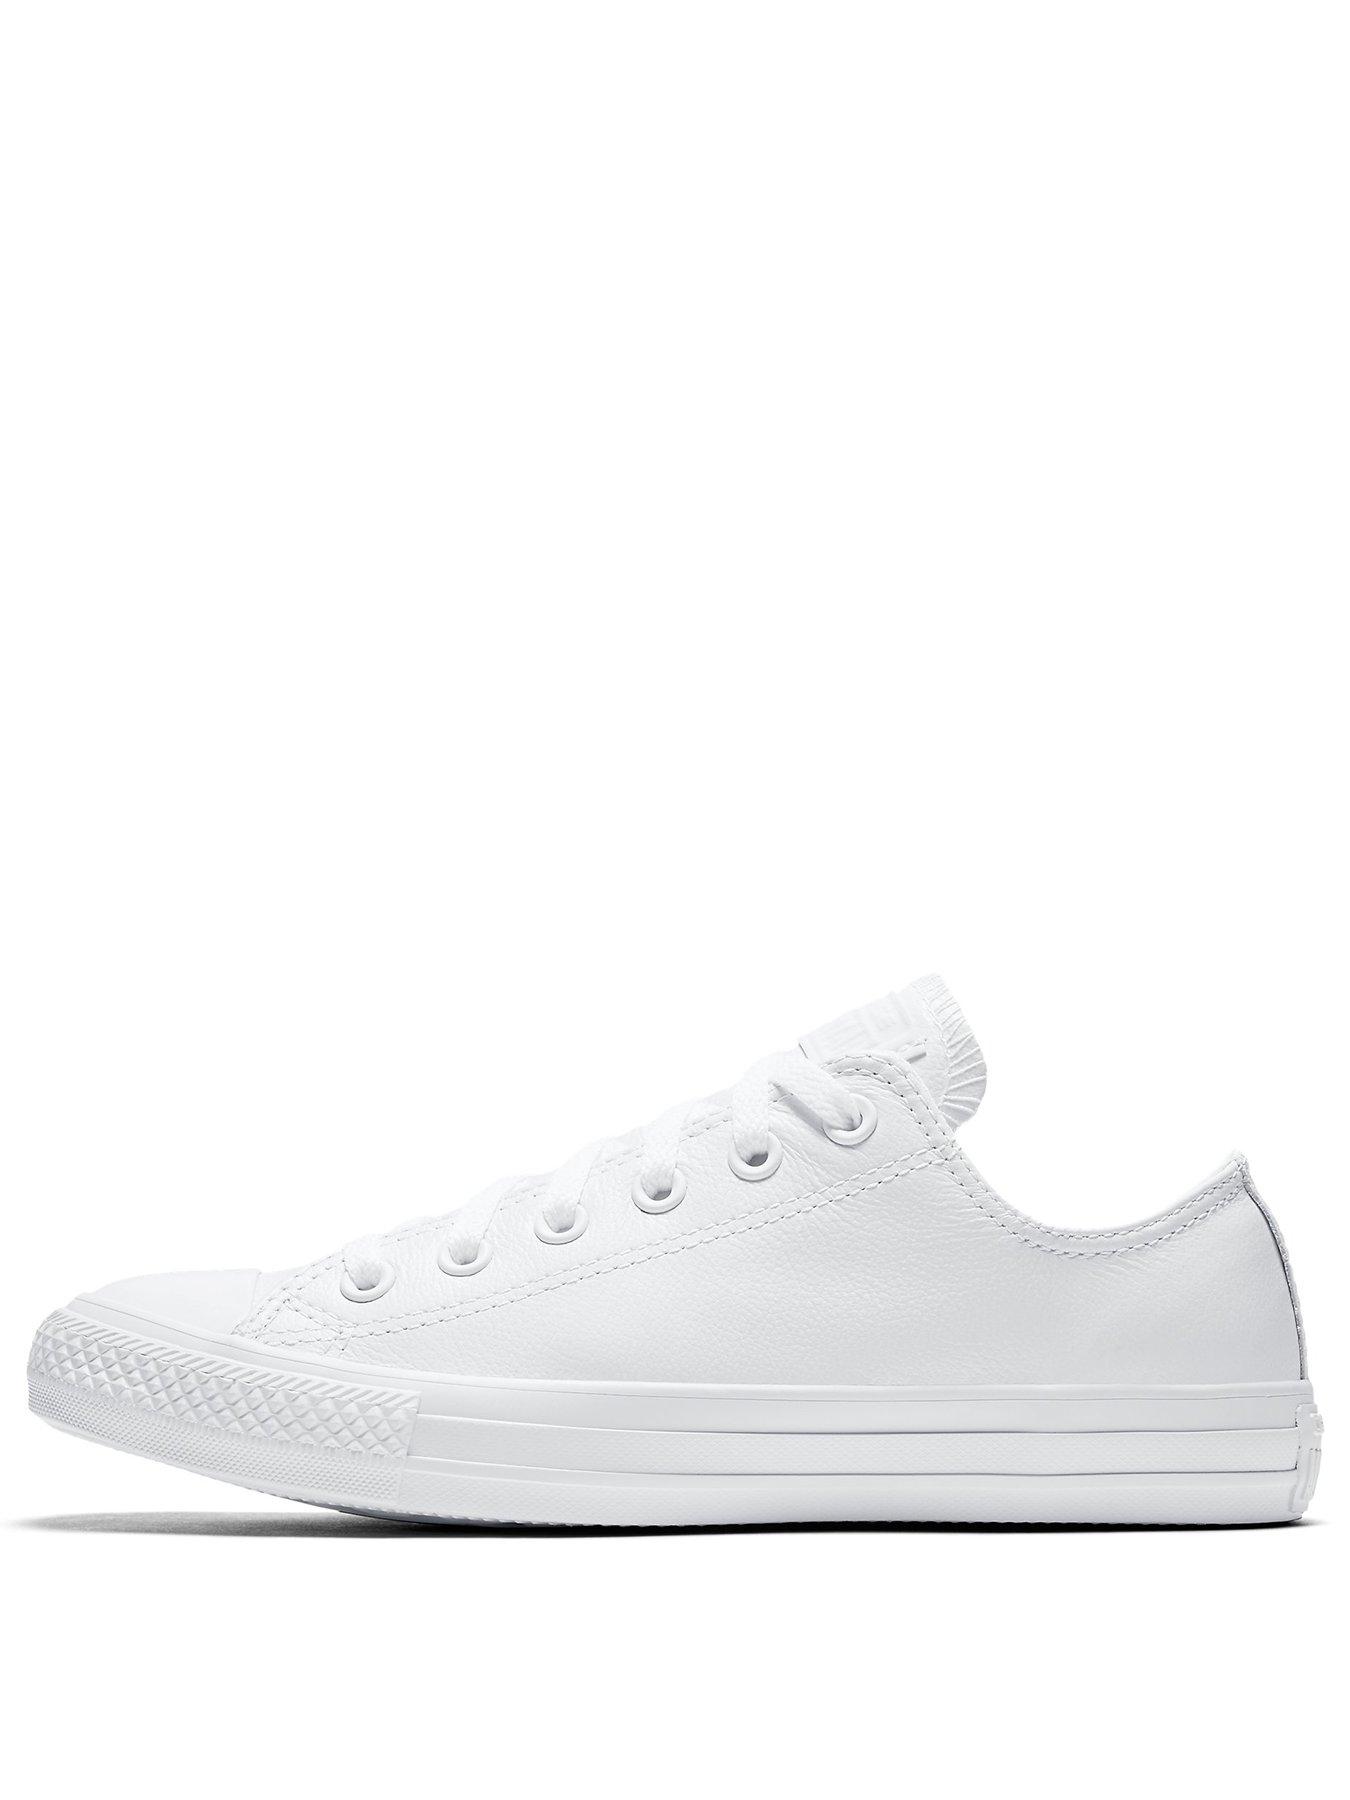 Converse Chuck Taylor All Star Leather Ox - White | very.co.uk